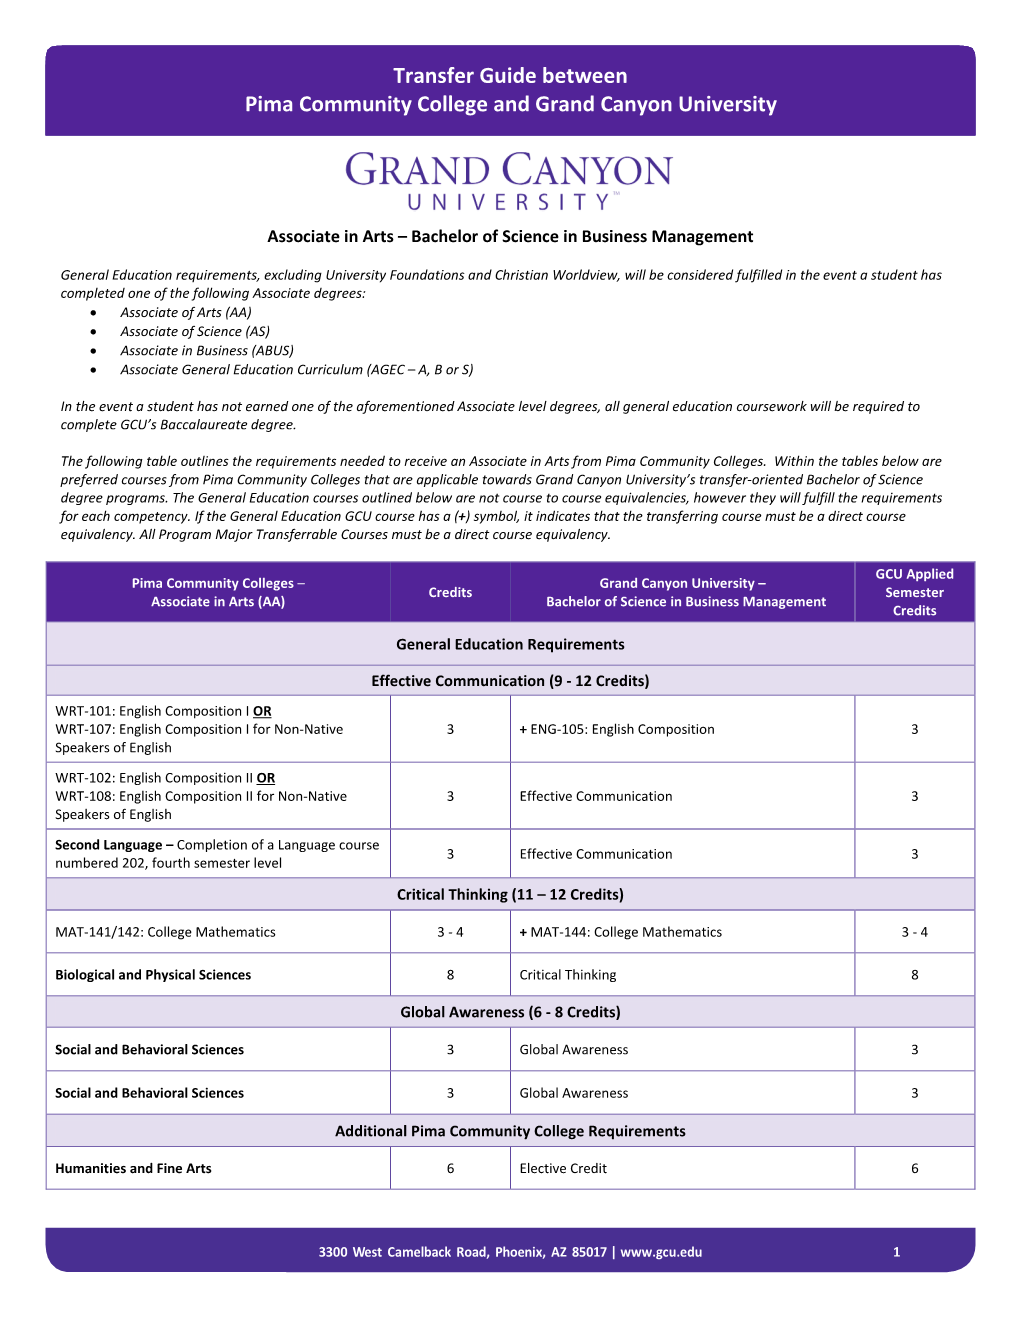 Transfer Guide Between Pima Community College and Grand Canyon University